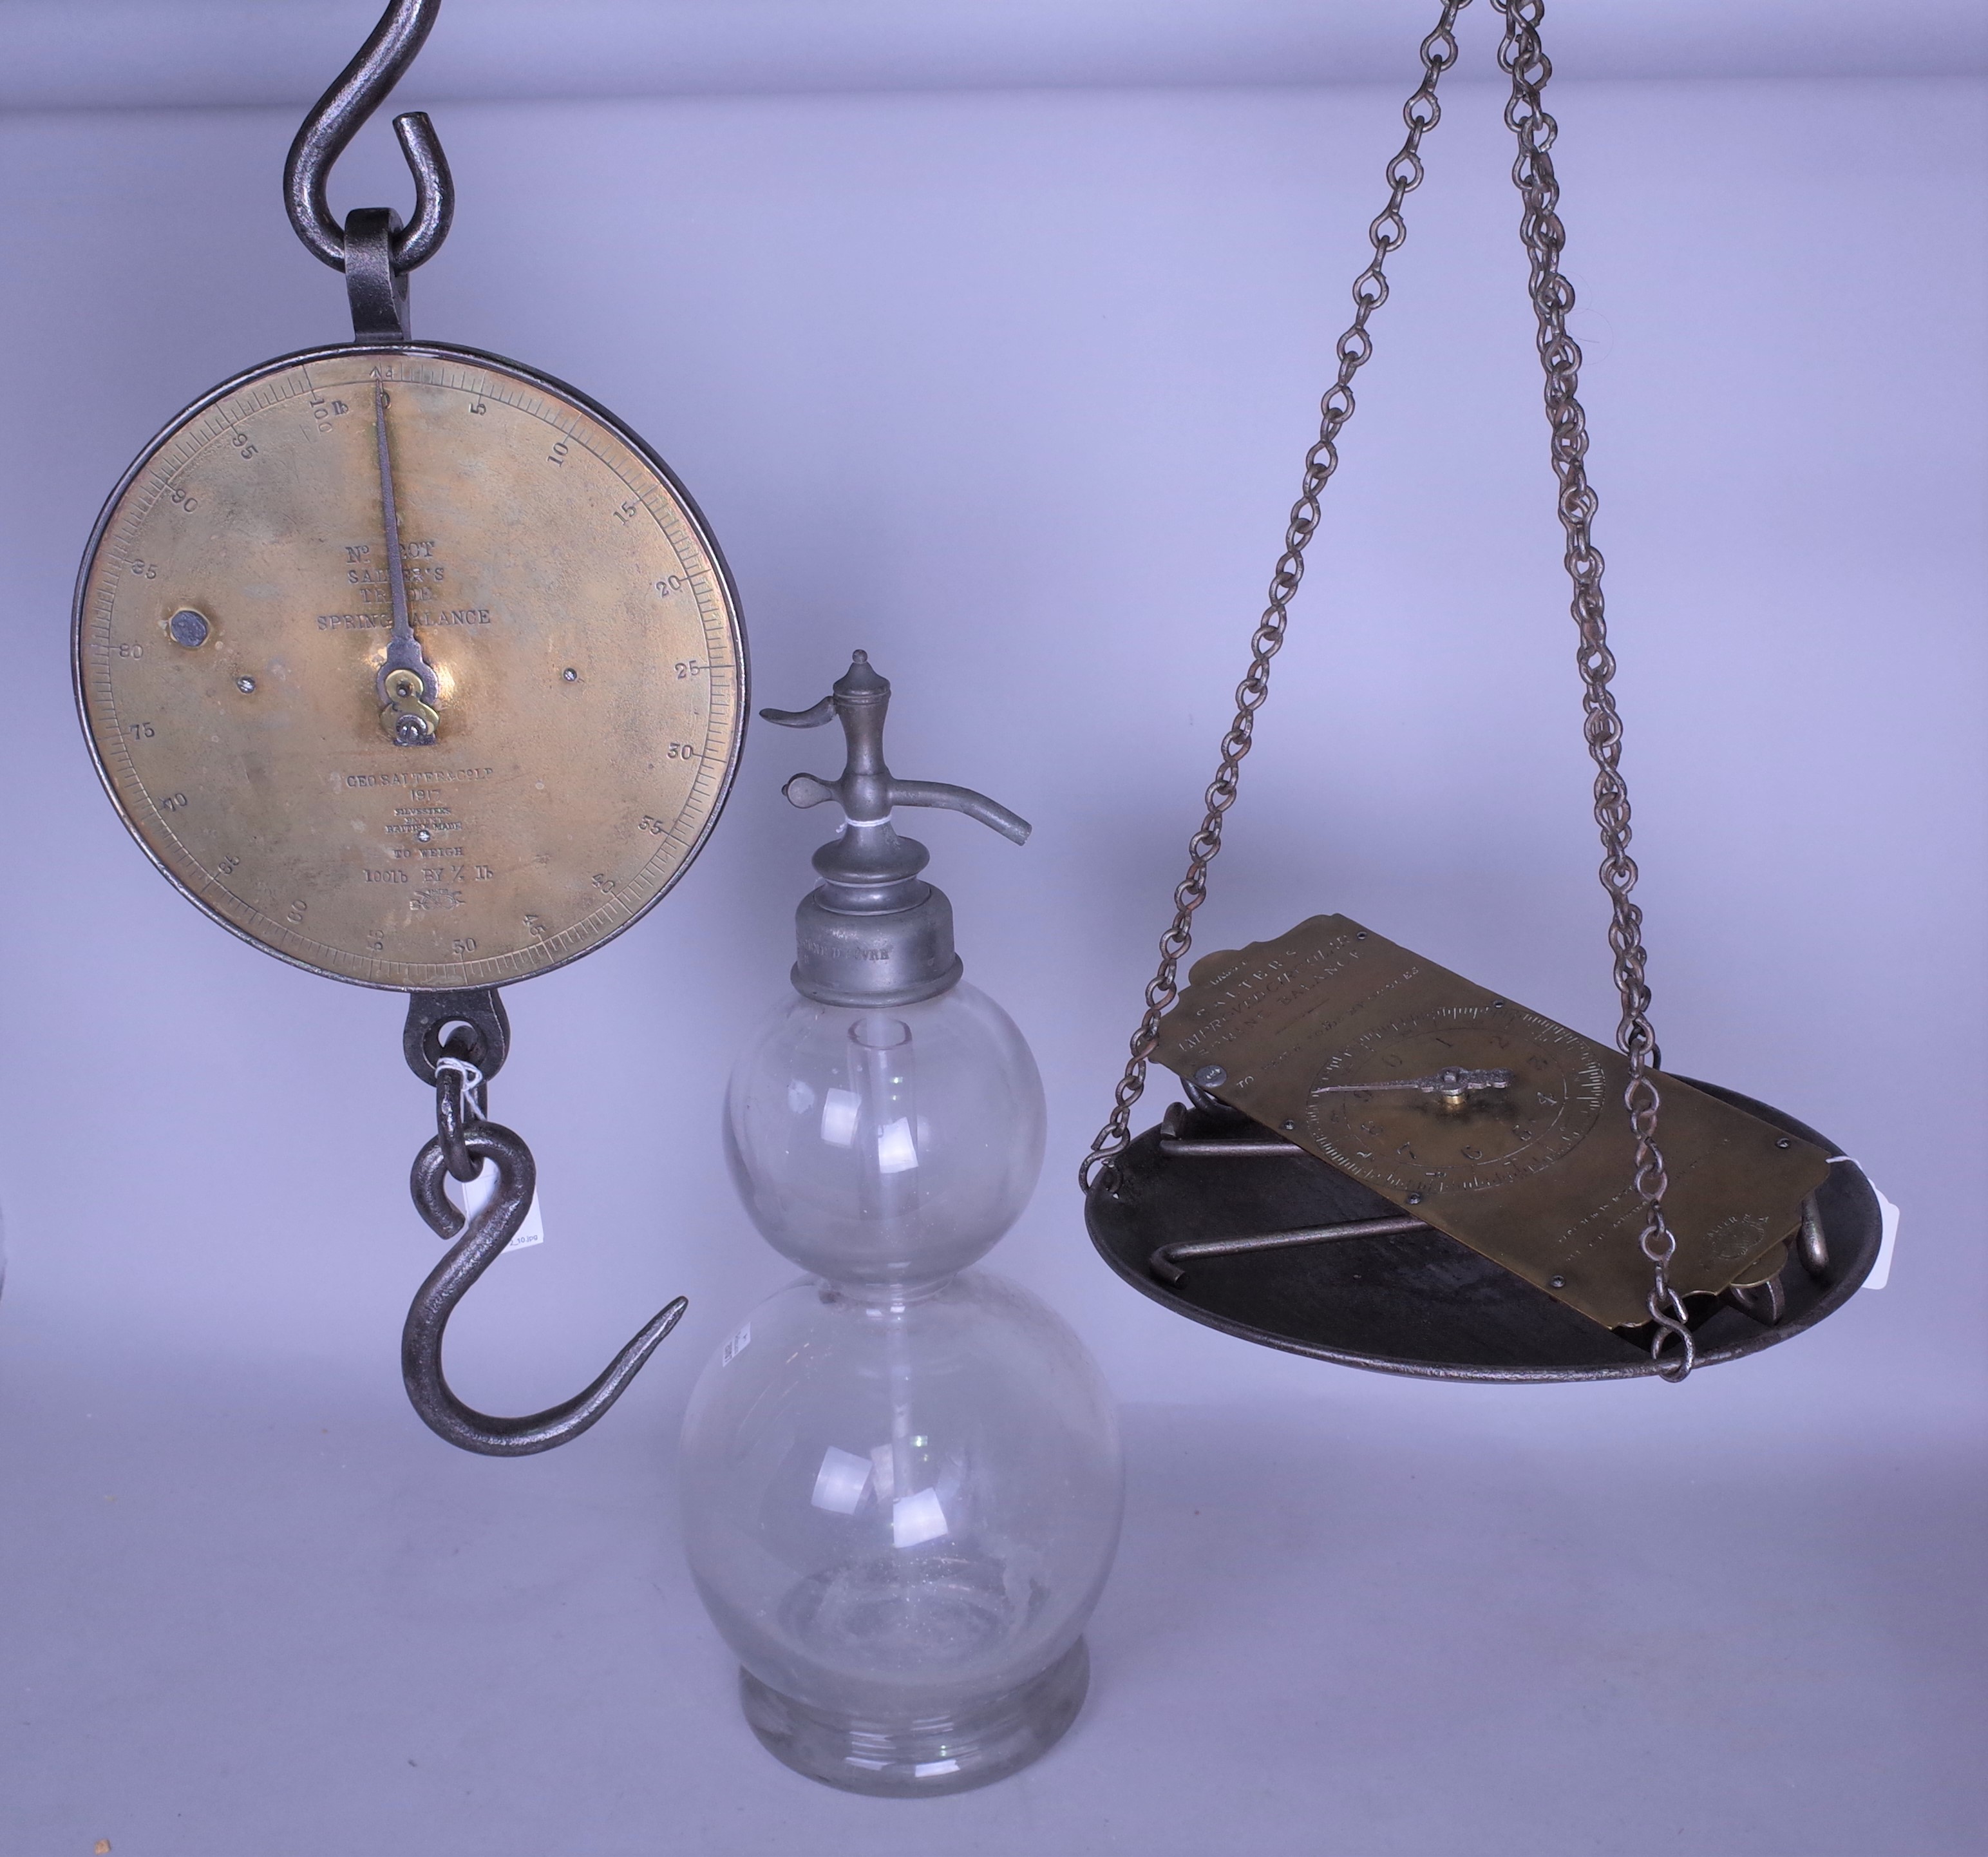 An early 20th century French double gourd soda siphon, and a pair of Salter balance scales. - Image 2 of 2